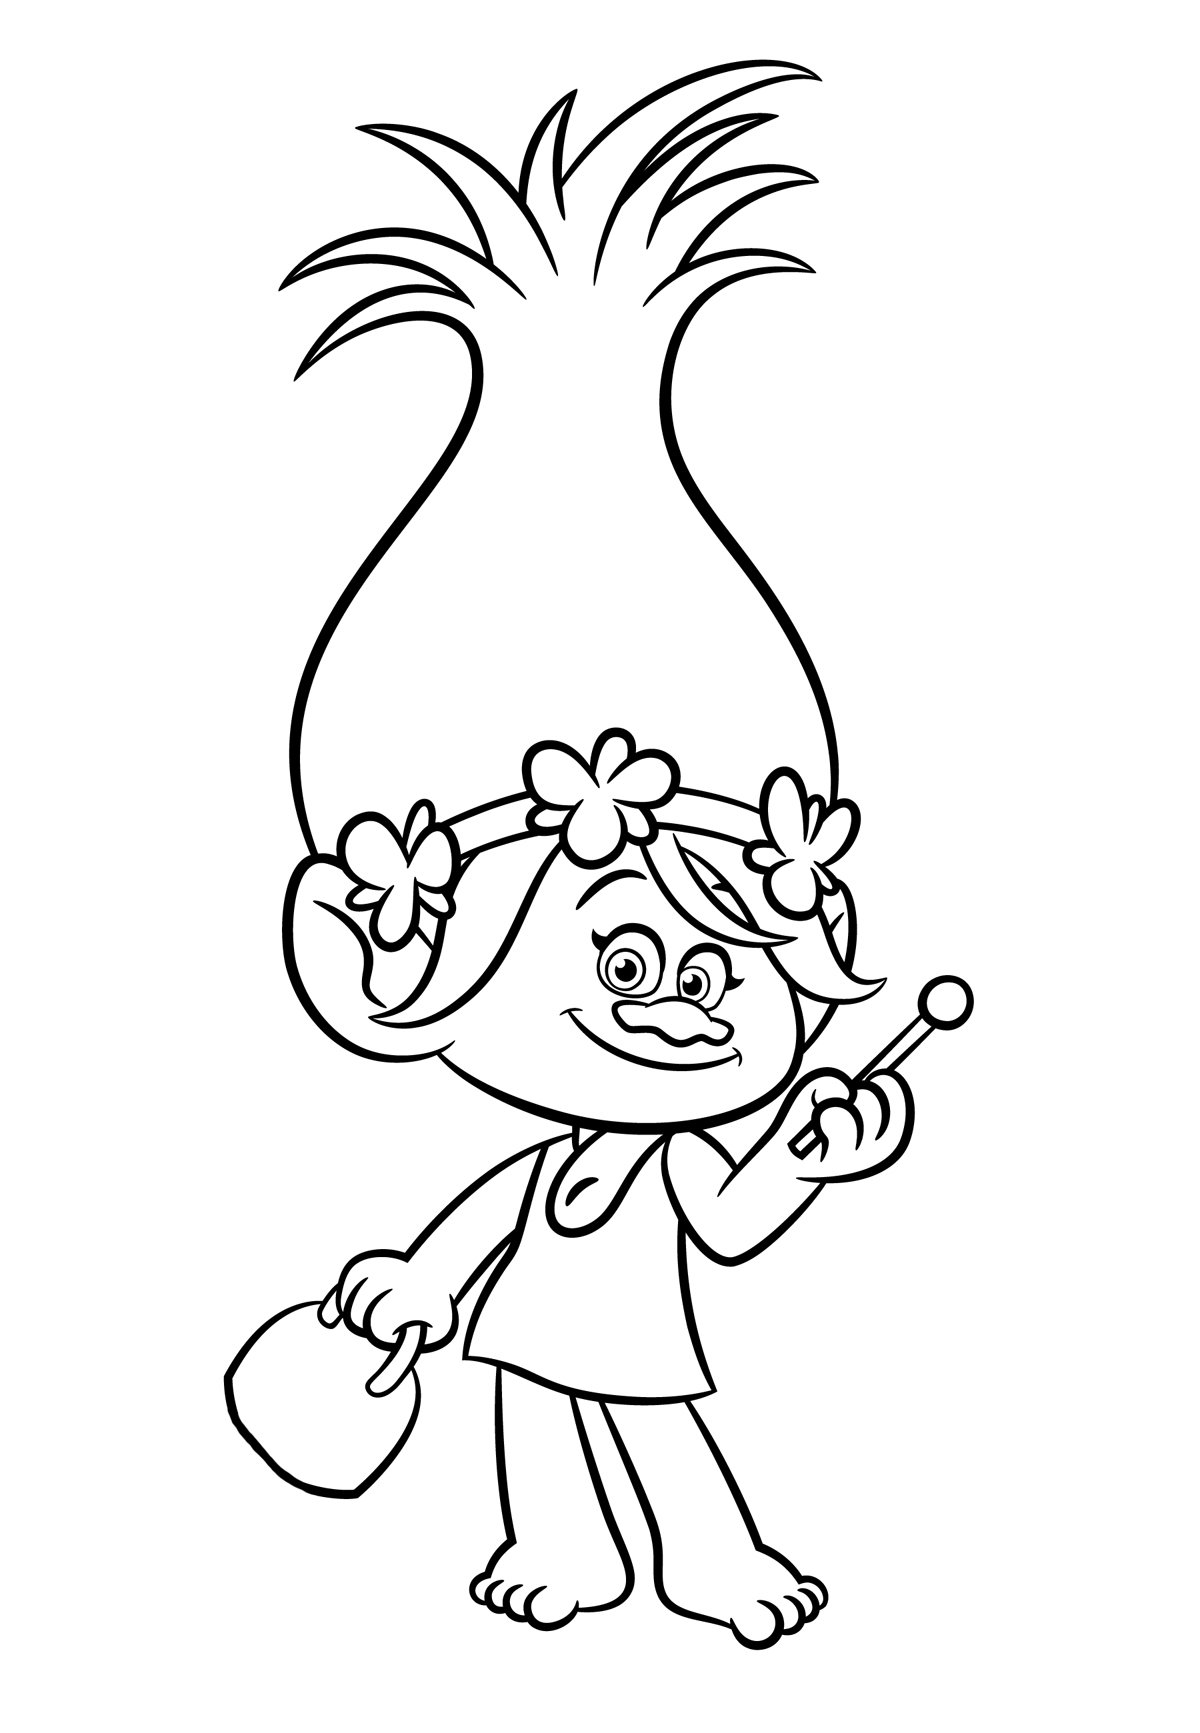 208 Animal Poppy Coloring Page with Printable